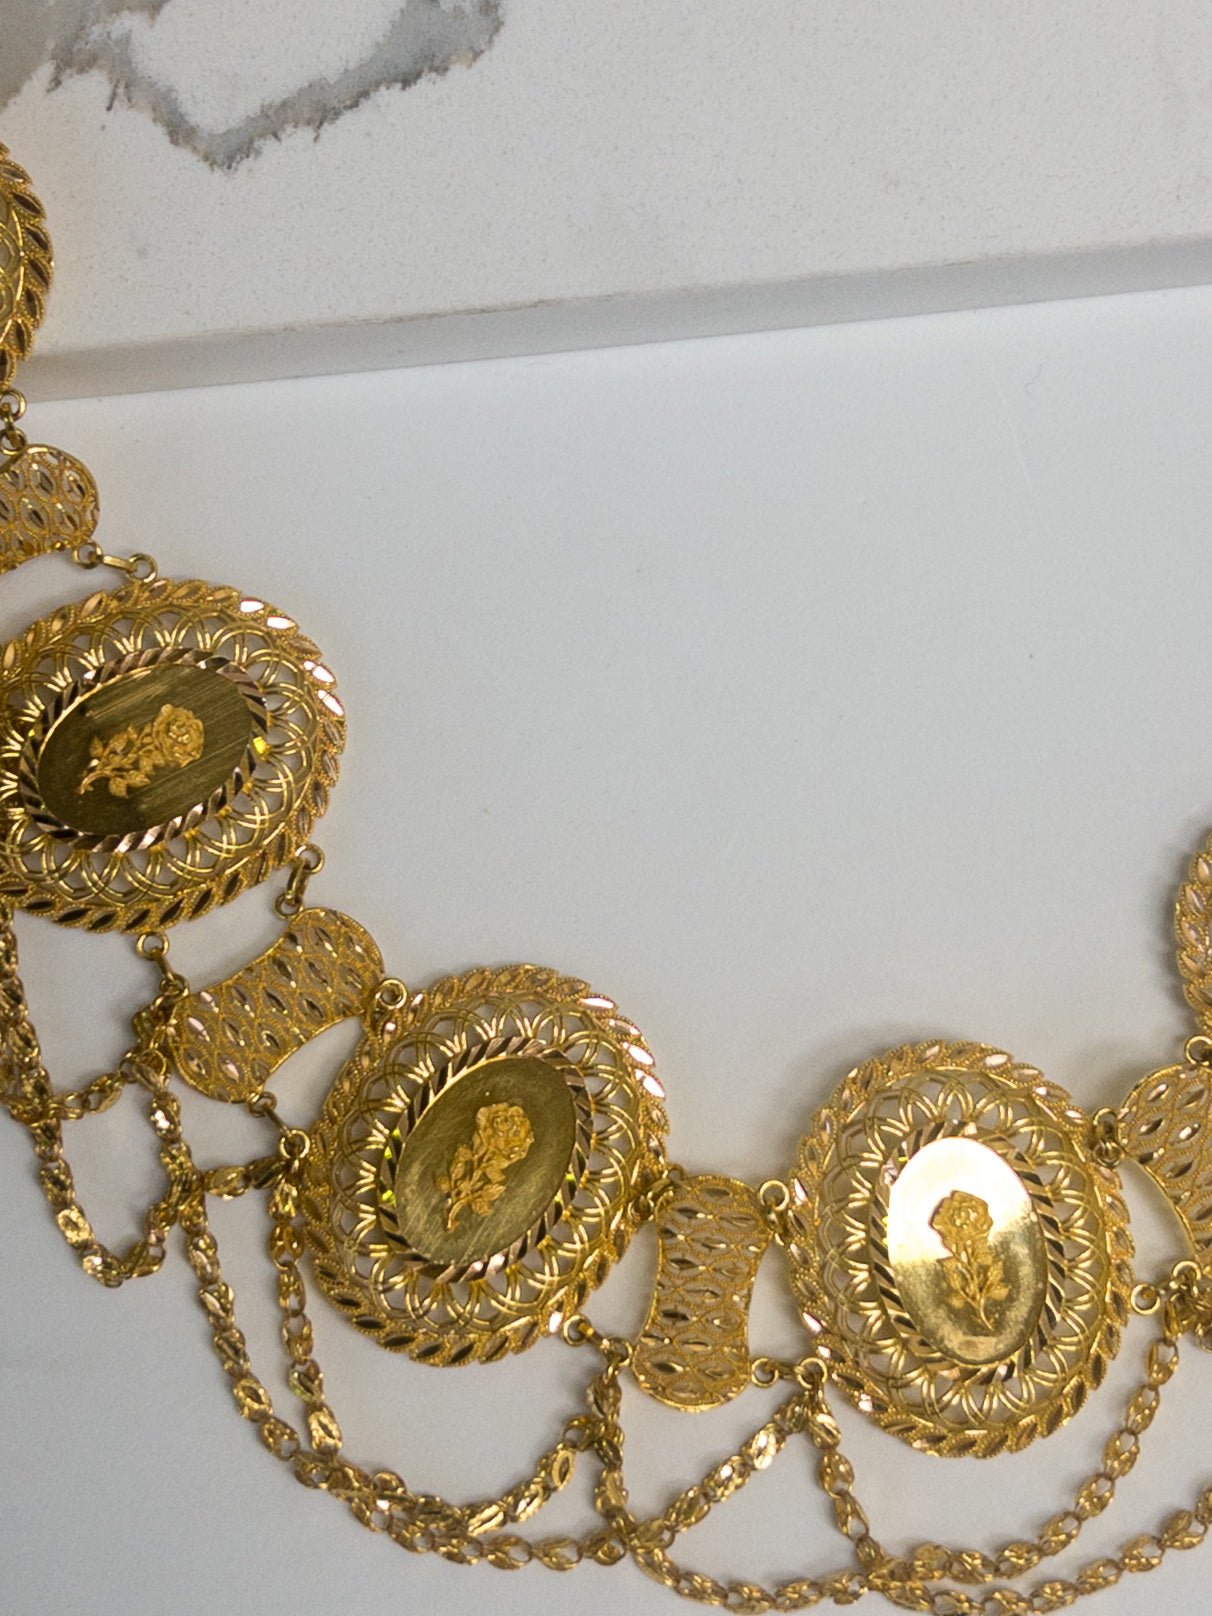 Egyptian Gold Coin Belt with Crescent Pendants and Chain Drapes at